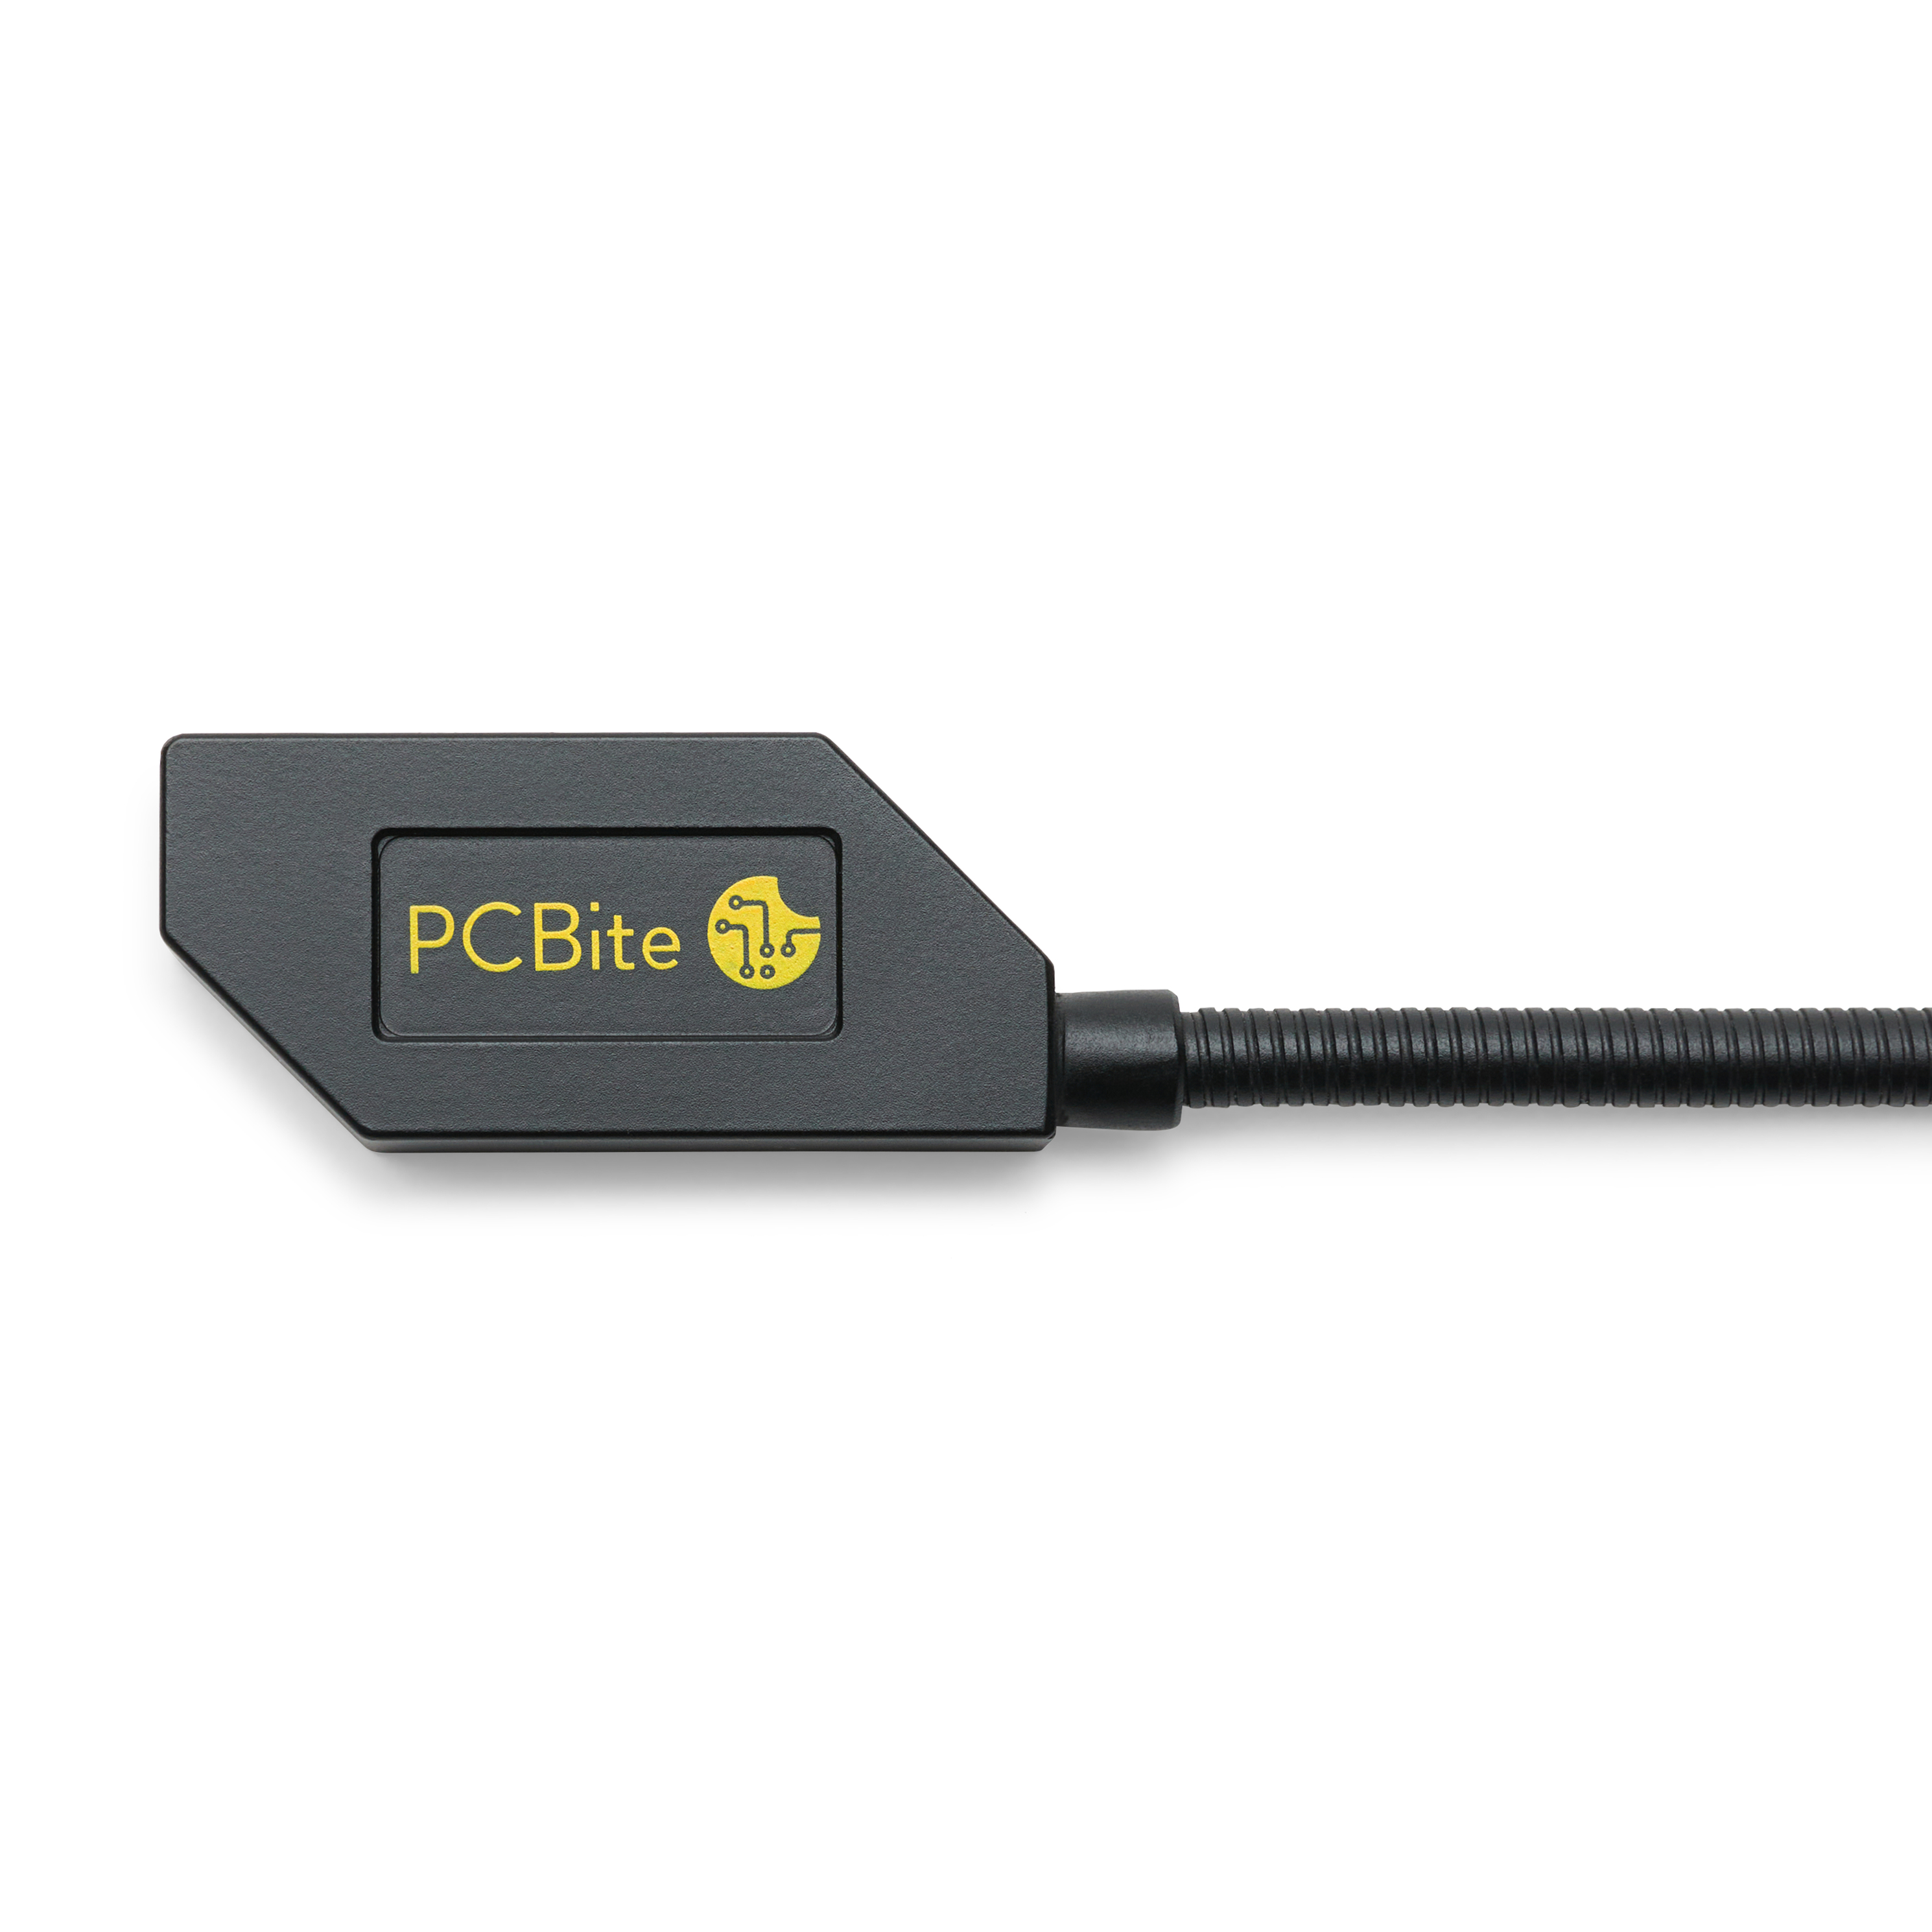 PCBite kit with 2x SQ10 probes for DMM @ electrokit